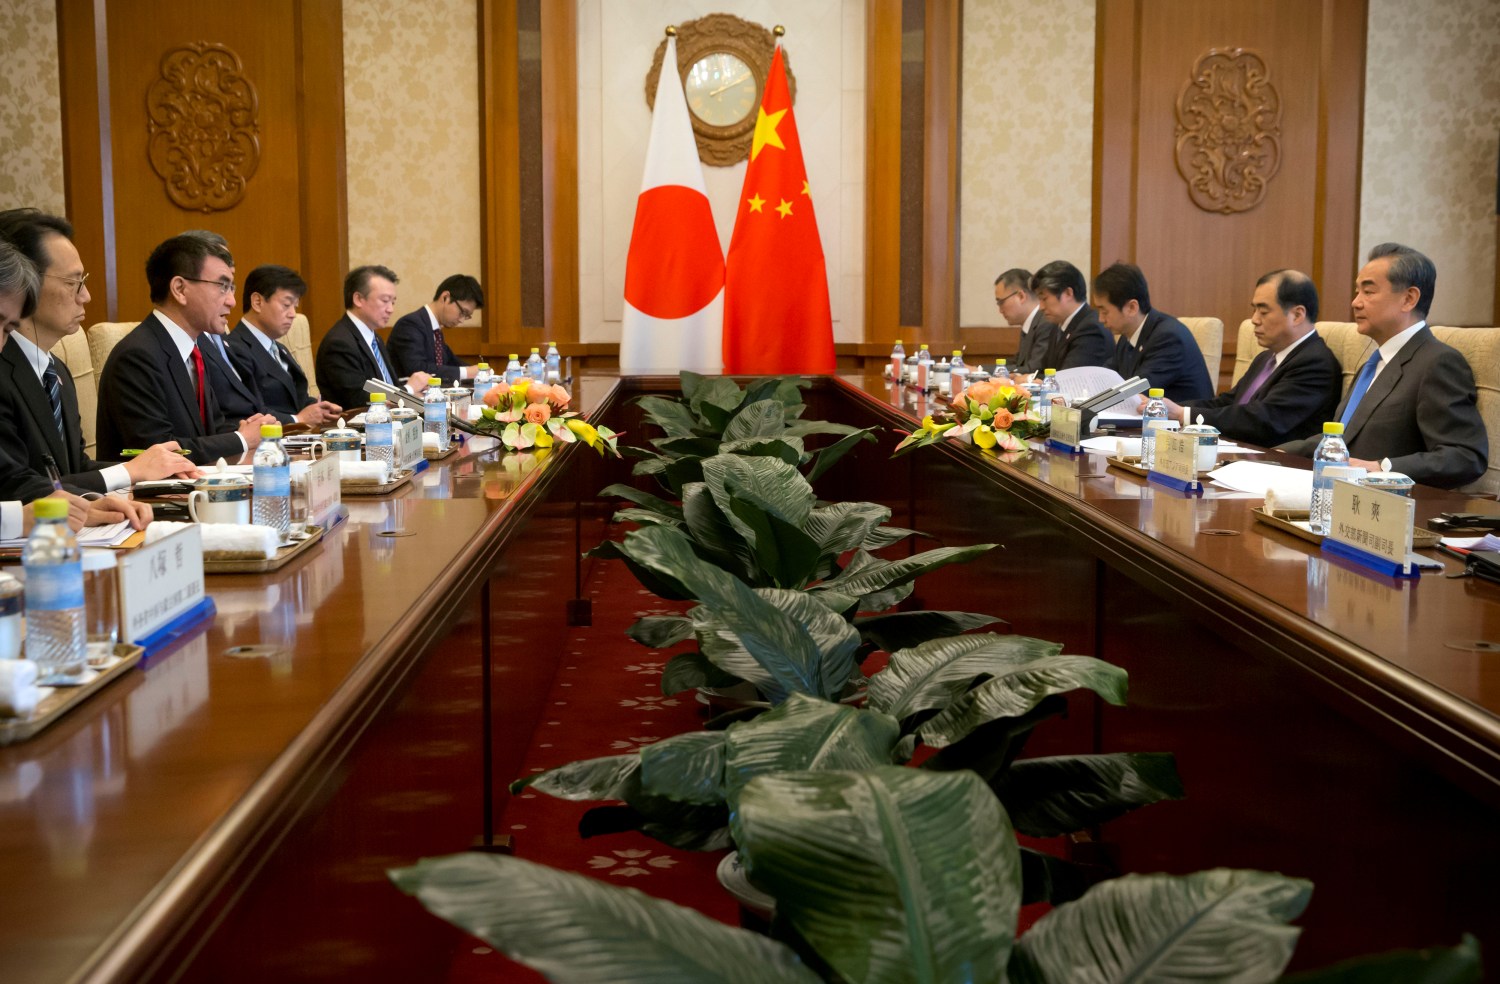 Japanese Foreign Minister Taro Kono (2nd L) talks during a meeting with Chinese Foreign Minister Wang Yi (R) at the Diaoyutai State Guesthouse in Beijing, China April 15, 2019. Mark Schiefelbein/Pool via REUTERS